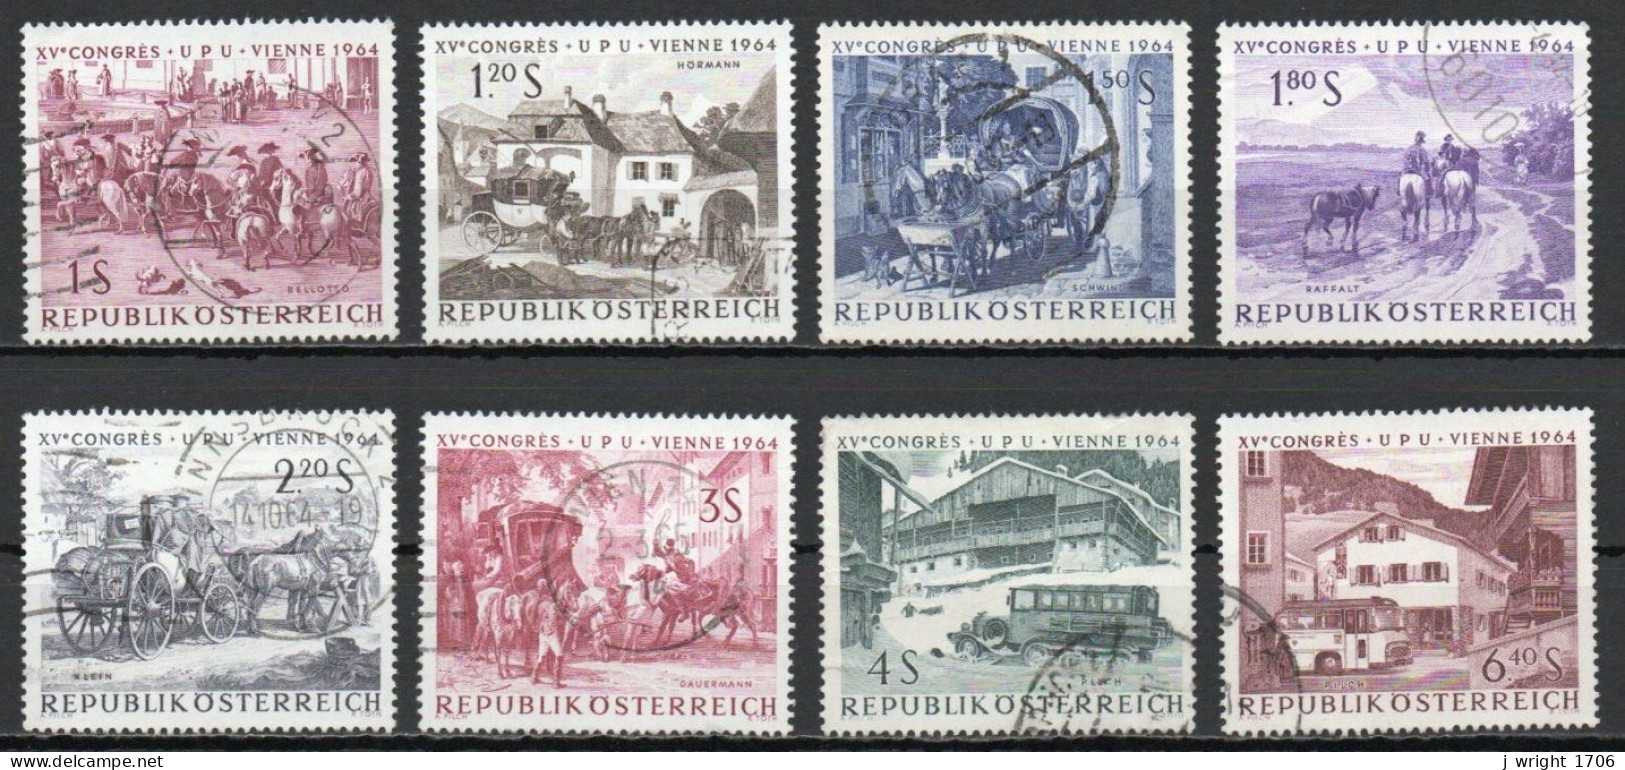 Austria, 1964, UPU Cong. Vienna, Set, USED - Used Stamps